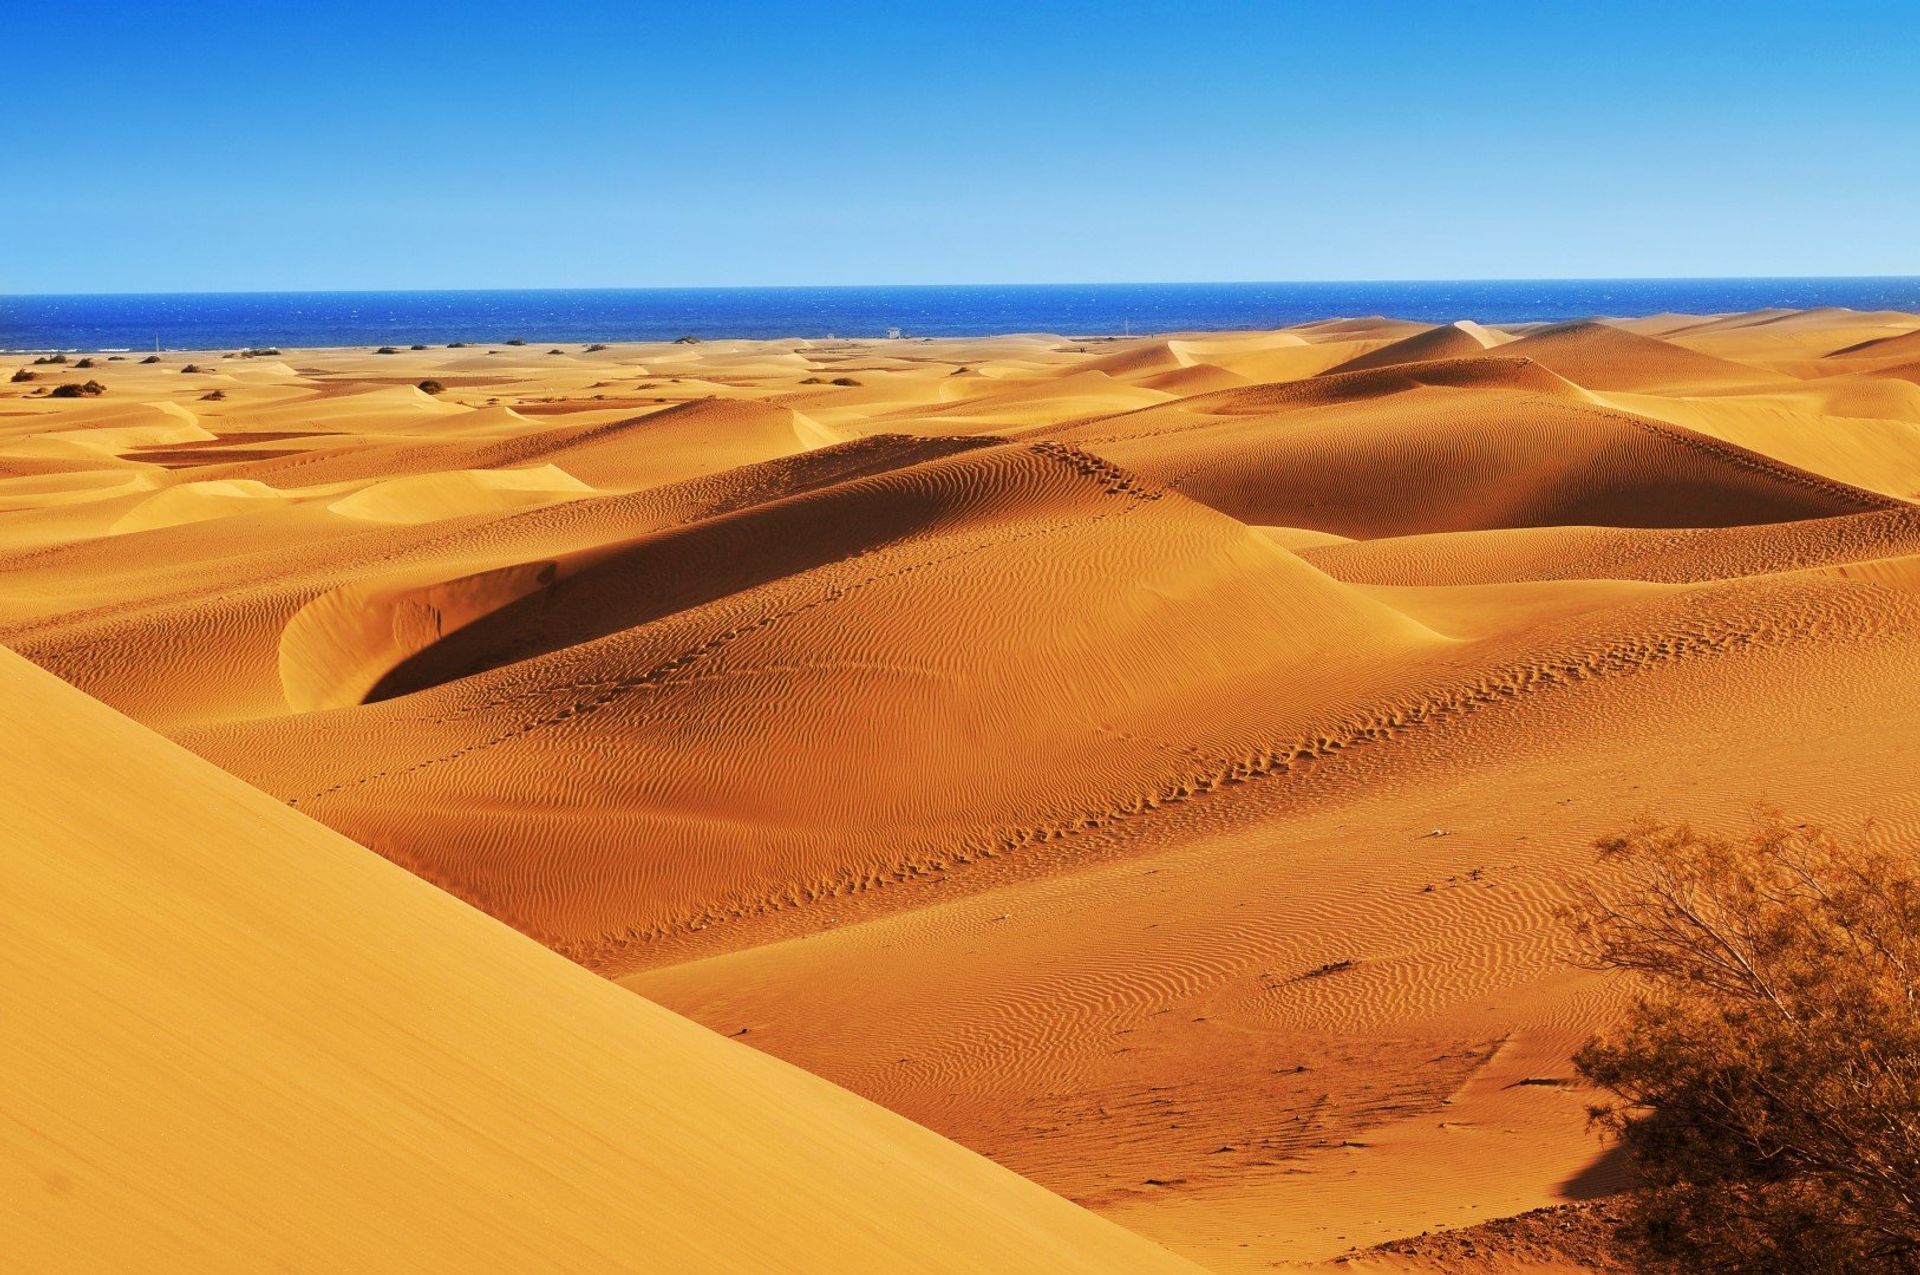 The canary desert dunes stretching under the Atlantic Ocean in the southeastern region of Gran Canaria